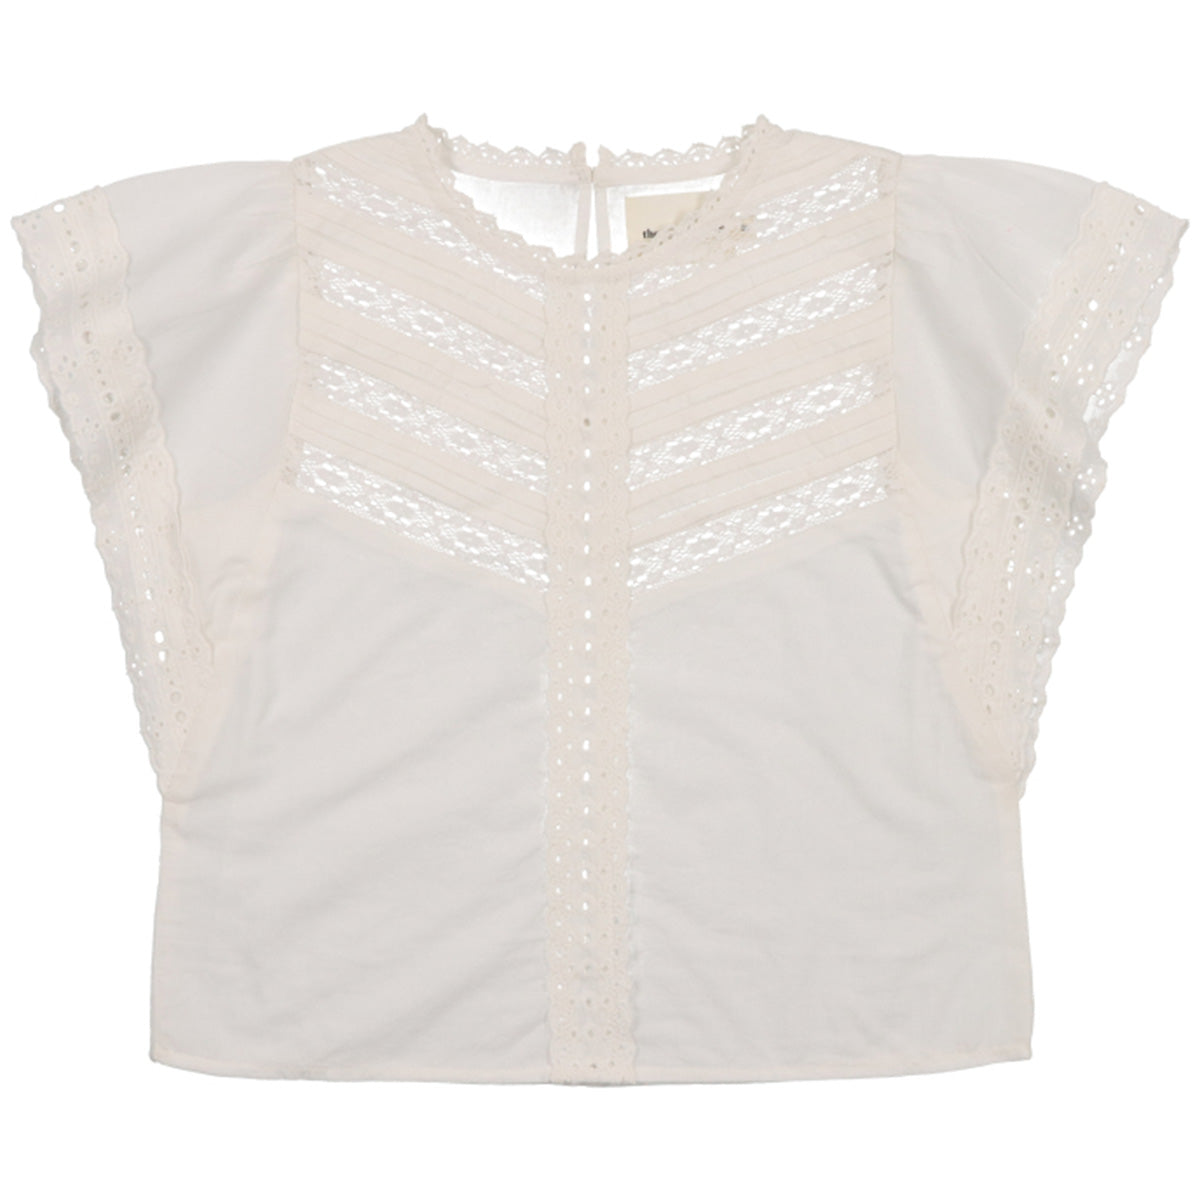 The Downey Blouse from The New Society. Very special cotton blouse in off white, with lace details